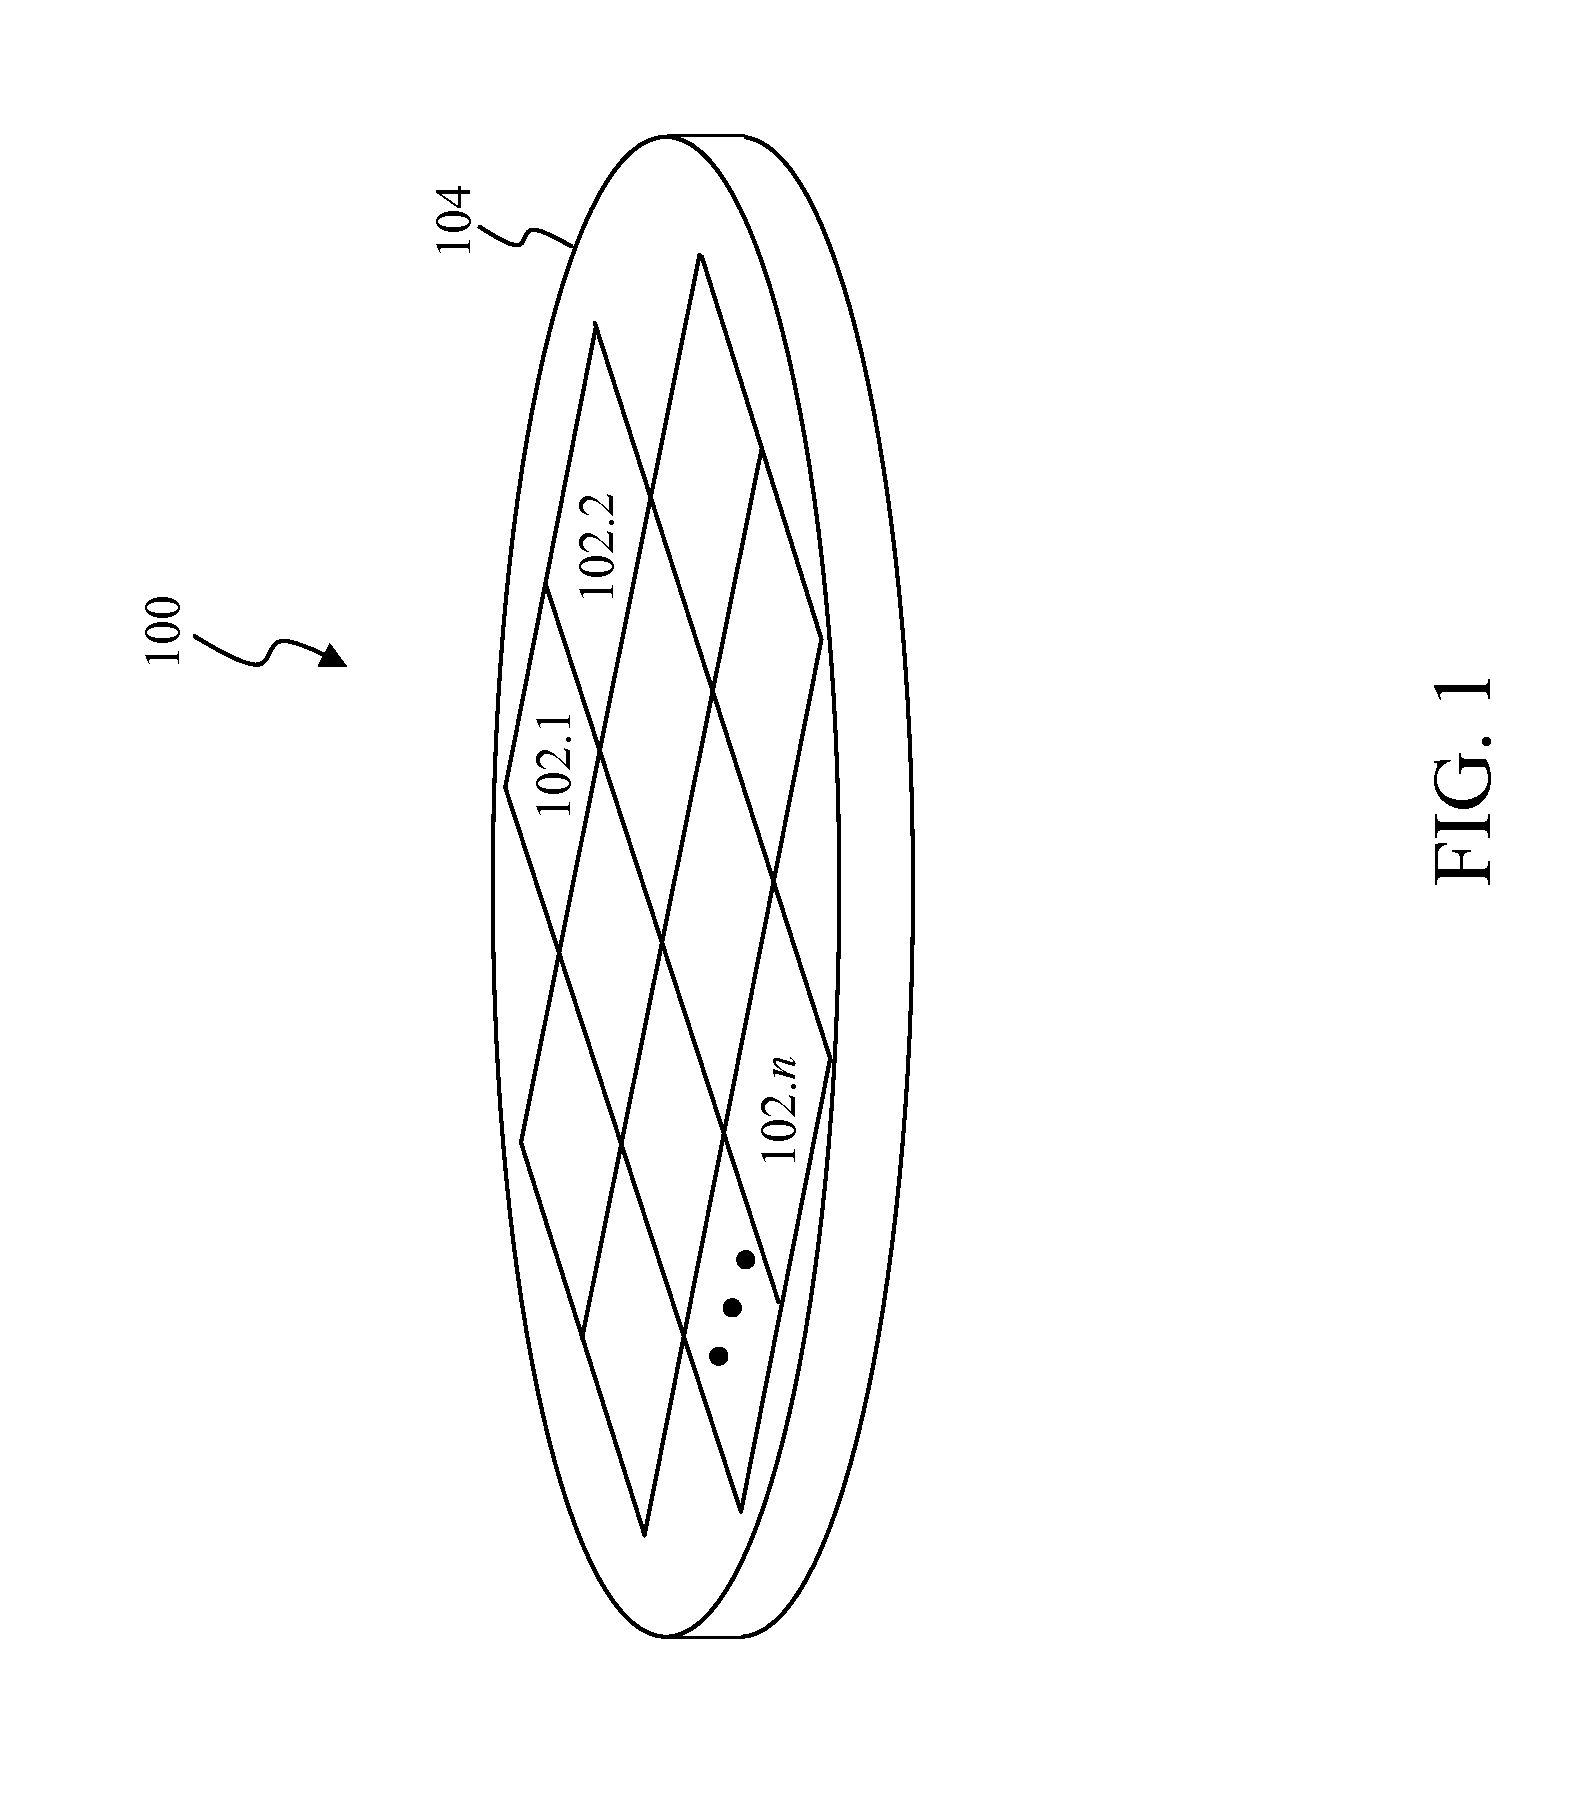 Signal distribution and radiation in a wireless enabled integrated circuit (IC) using a leaky waveguide